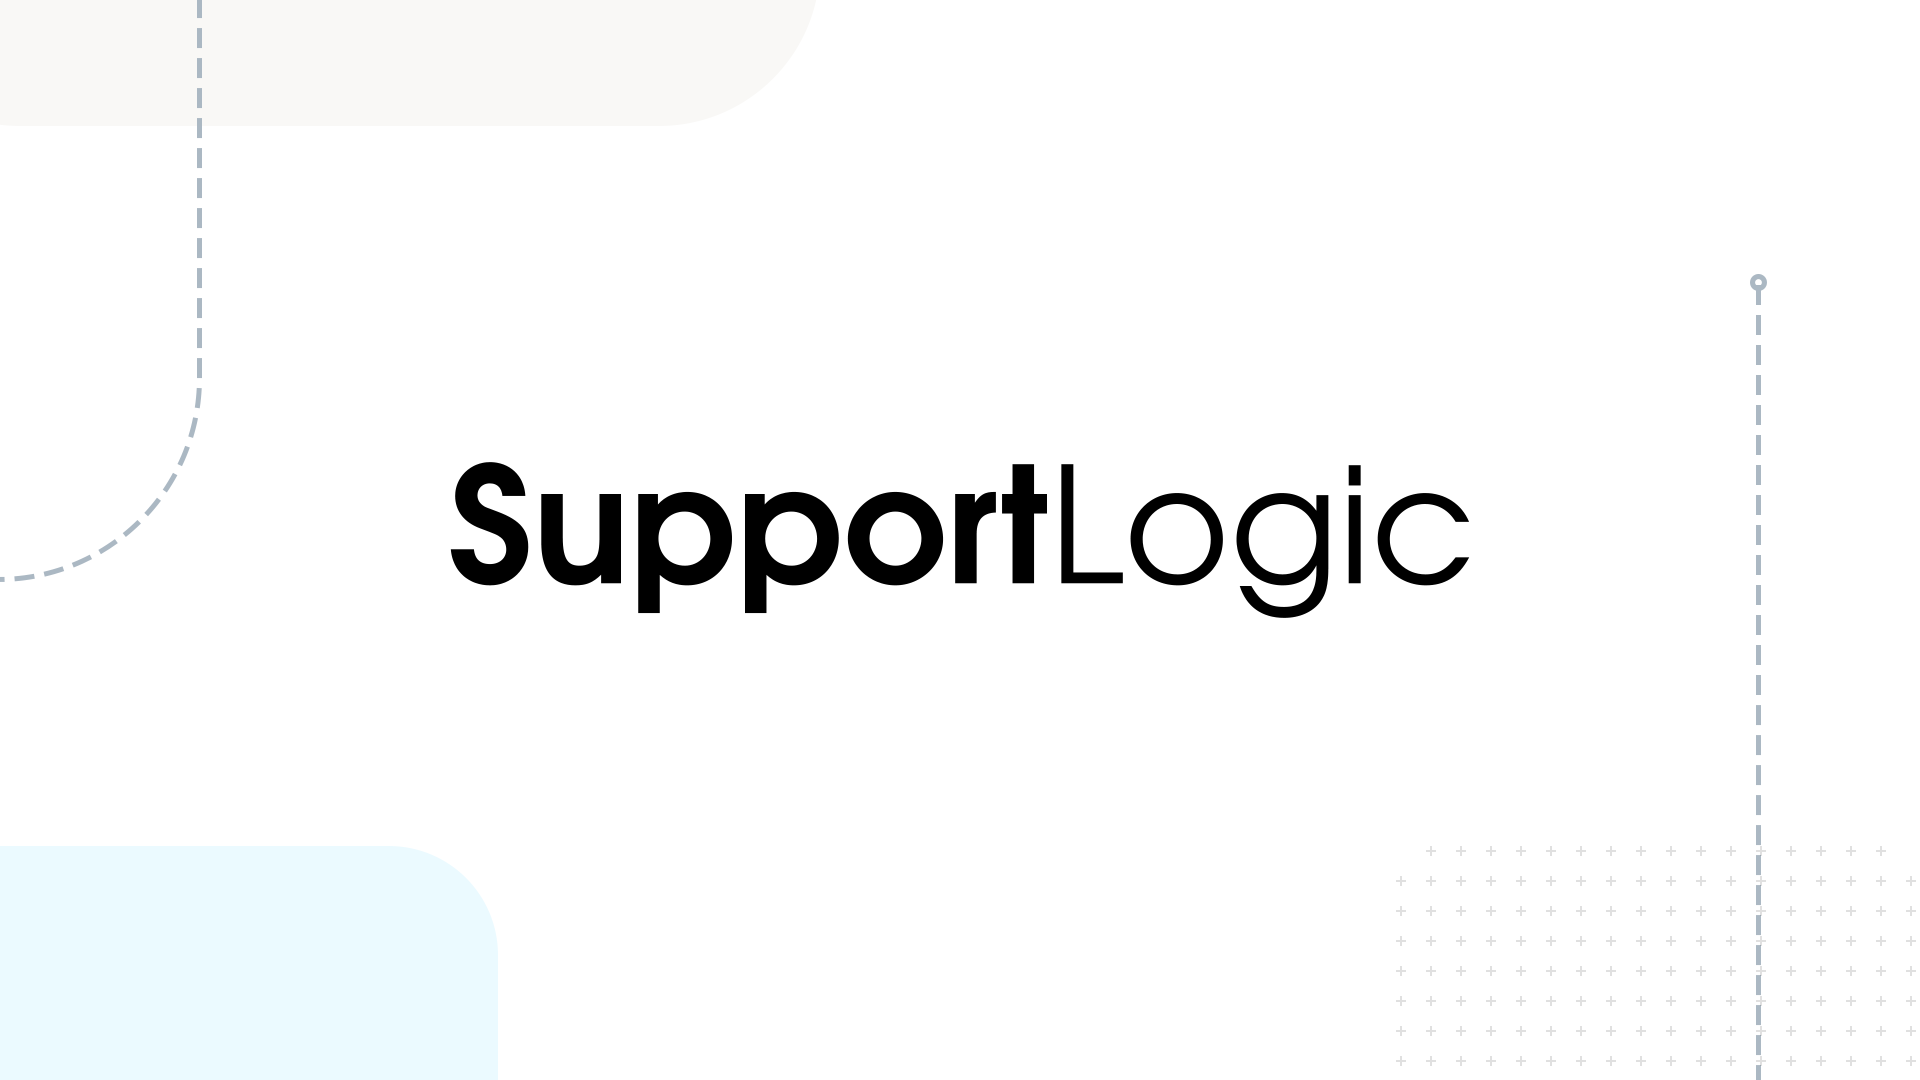 Why we Invested in SupportLogic